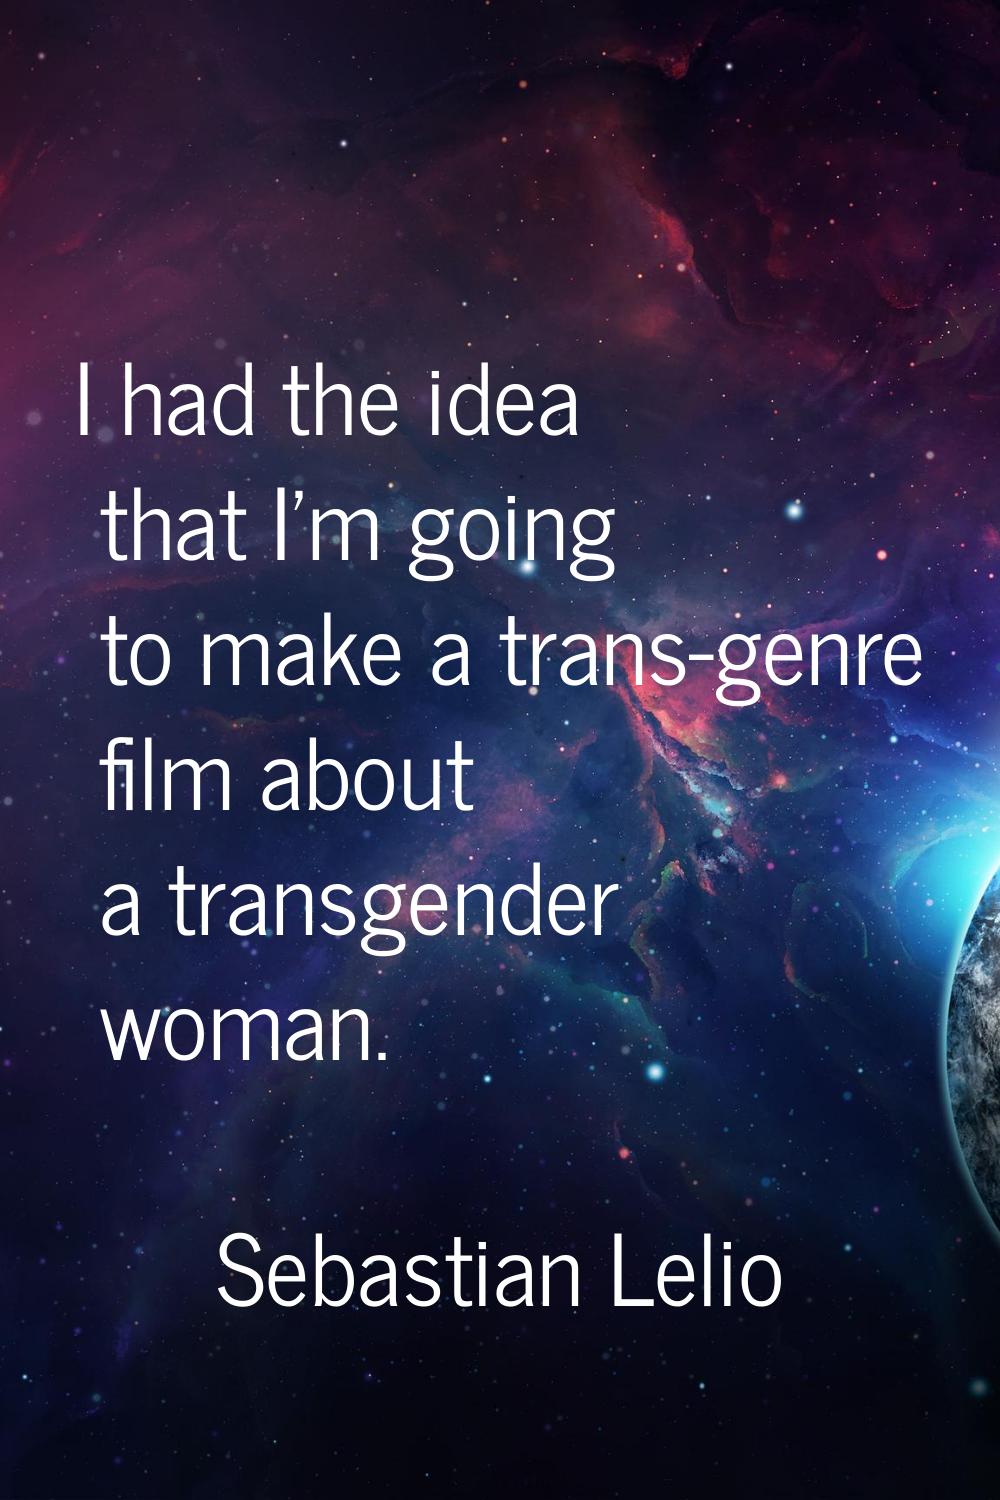 I had the idea that I'm going to make a trans-genre film about a transgender woman.